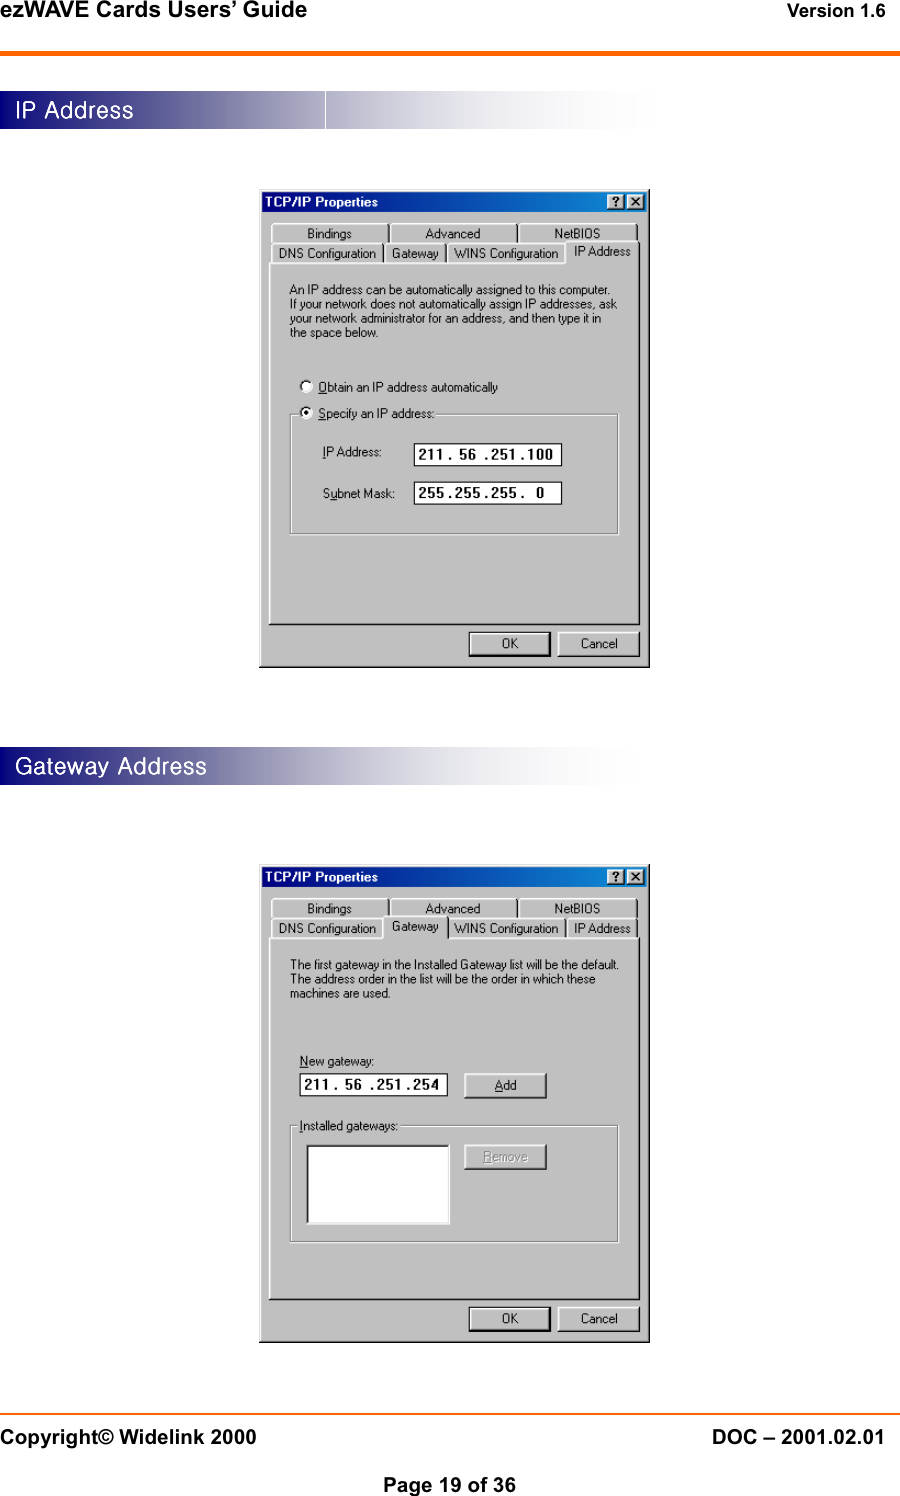 ezWAVE Cards Users’ Guide Version 1.6 Copyright© Widelink 2000 DOC – 2001.02.01Page 19 of 36 IP AddressIP AddressIP AddressIP Address    Gateway AddressGateway AddressGateway AddressGateway Address    